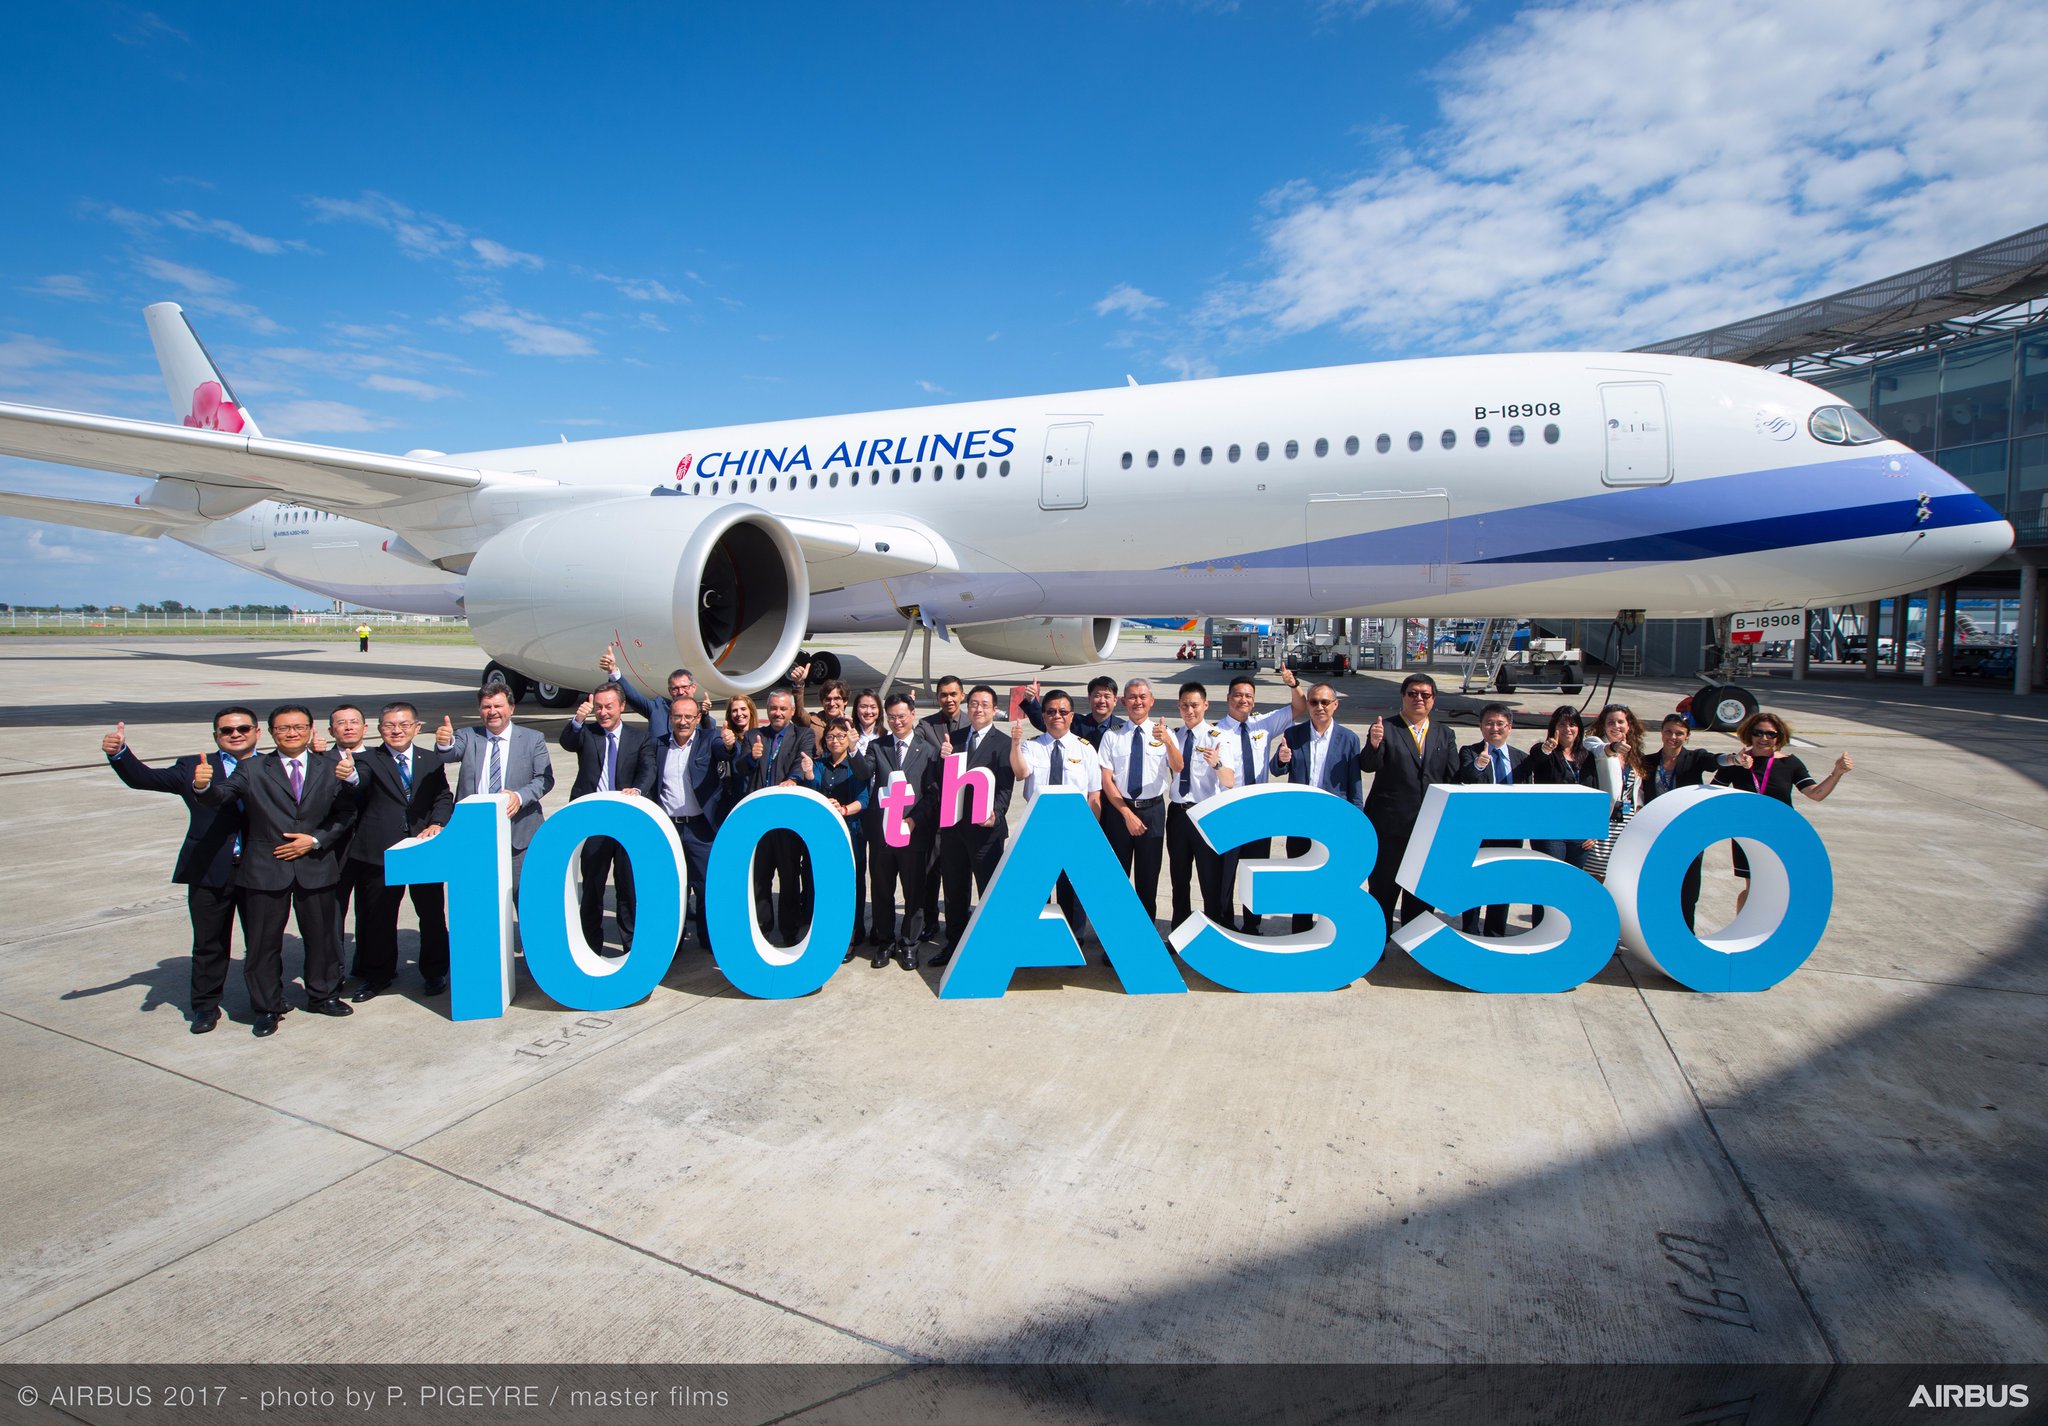 Airbus A350: Already 100th aircraft delivered